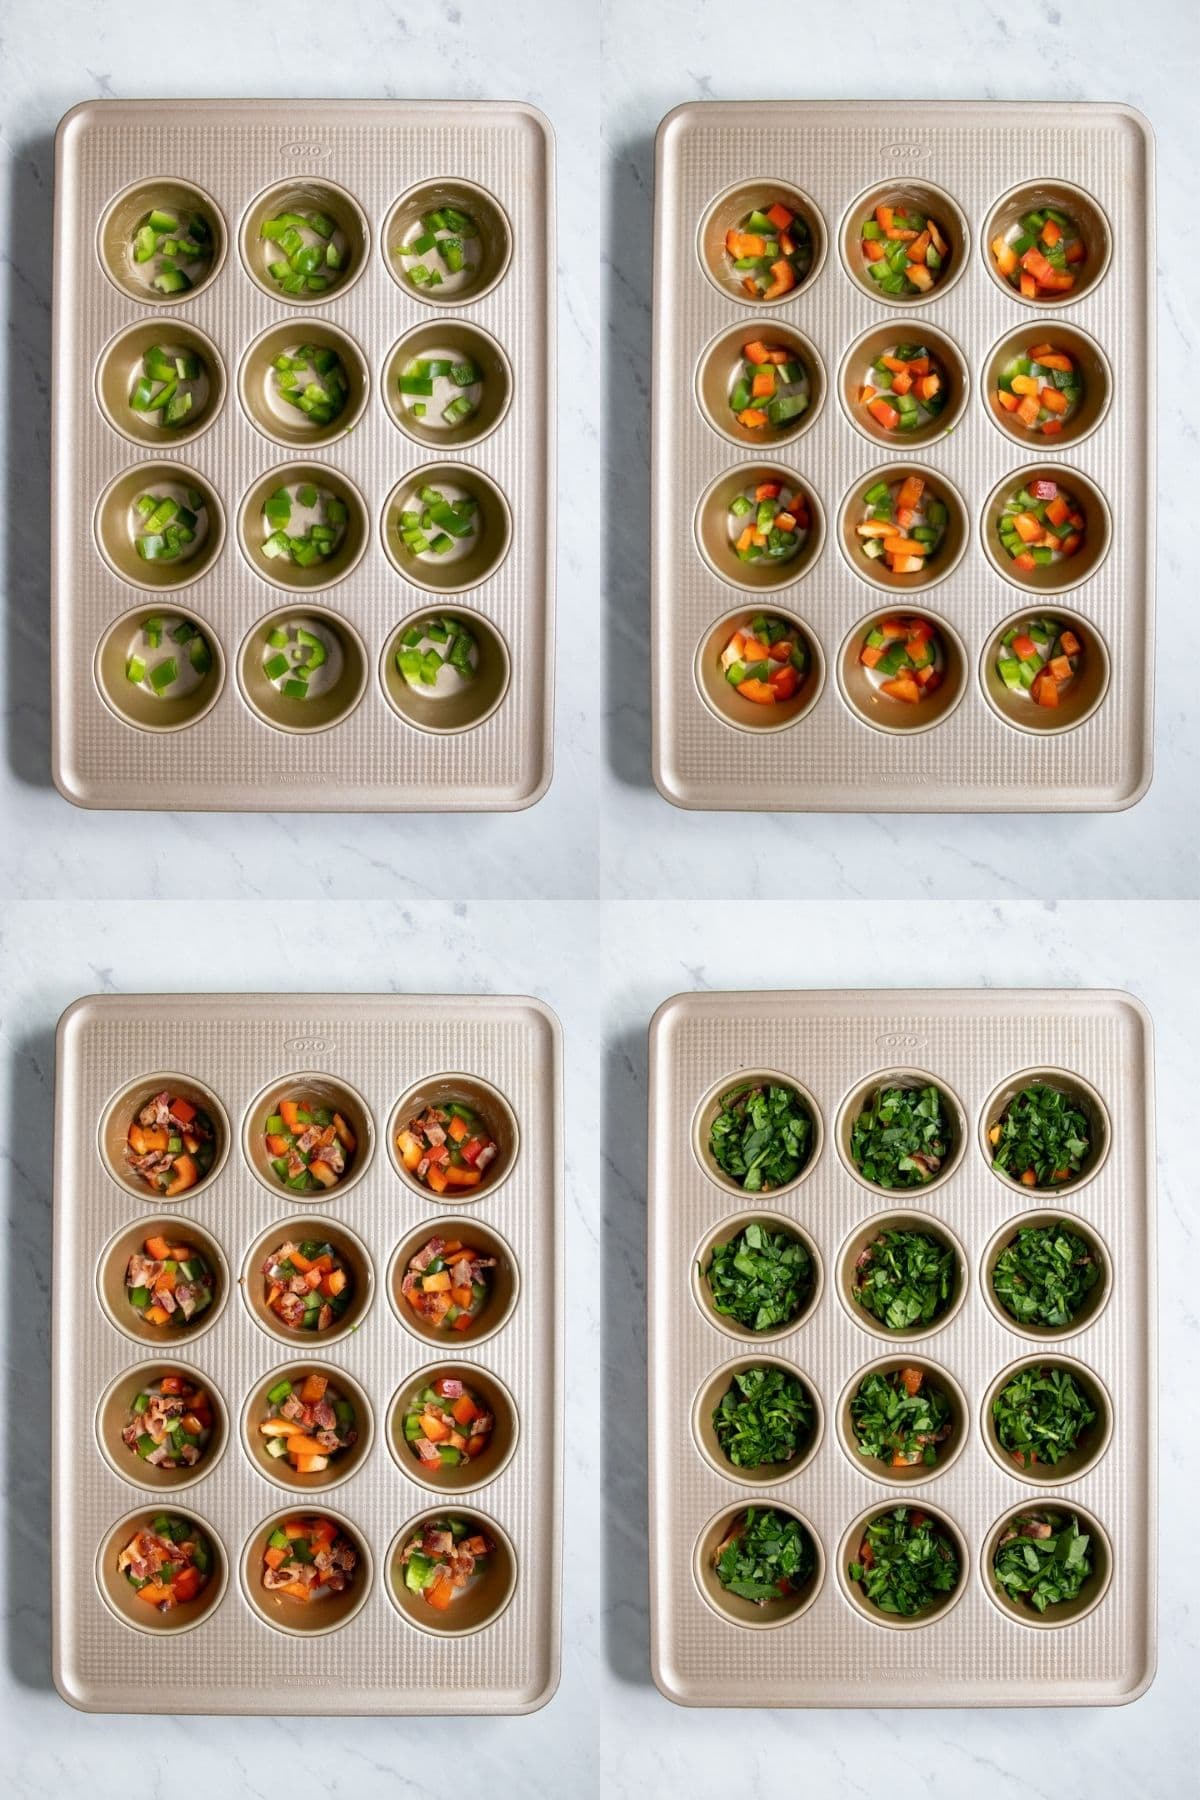 Four pictures in one. Each picture has a muffin tin that gets progressively filled with ingredients. First, chopped green bell pepper. Second, chopped red bell pepper. Third, cooked and crumbled bacon. Fourth, chopped spinach.